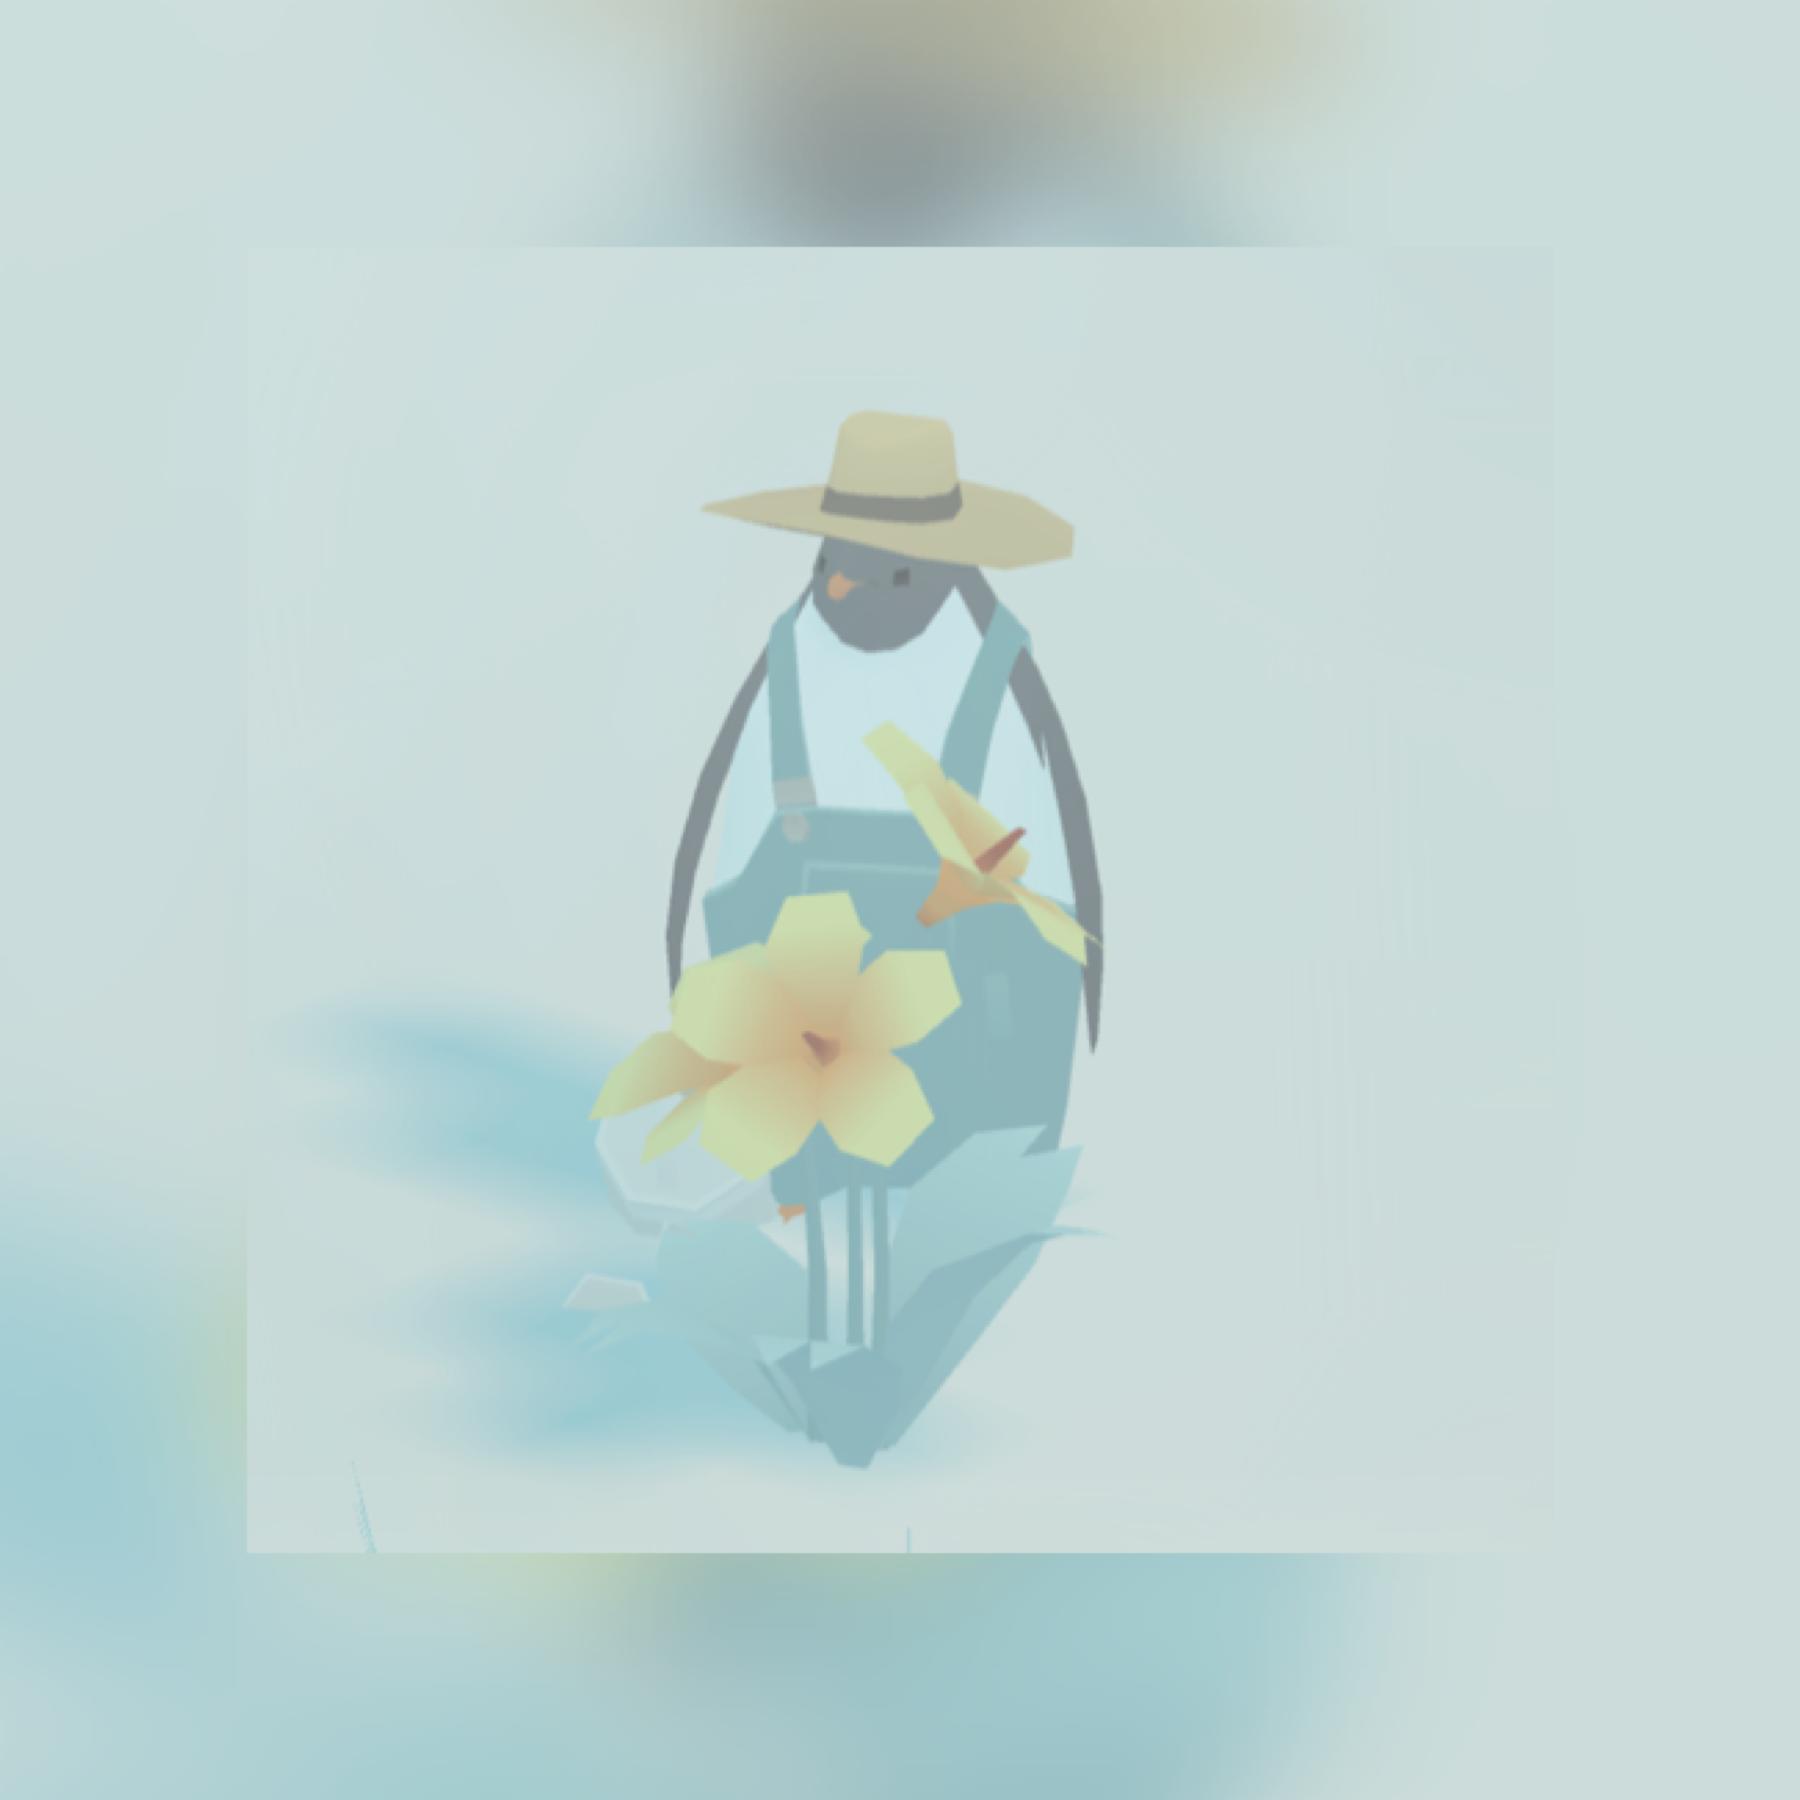 this is from the game penguin isle, it’s really cute and helps me relax, you should give it a try 💕